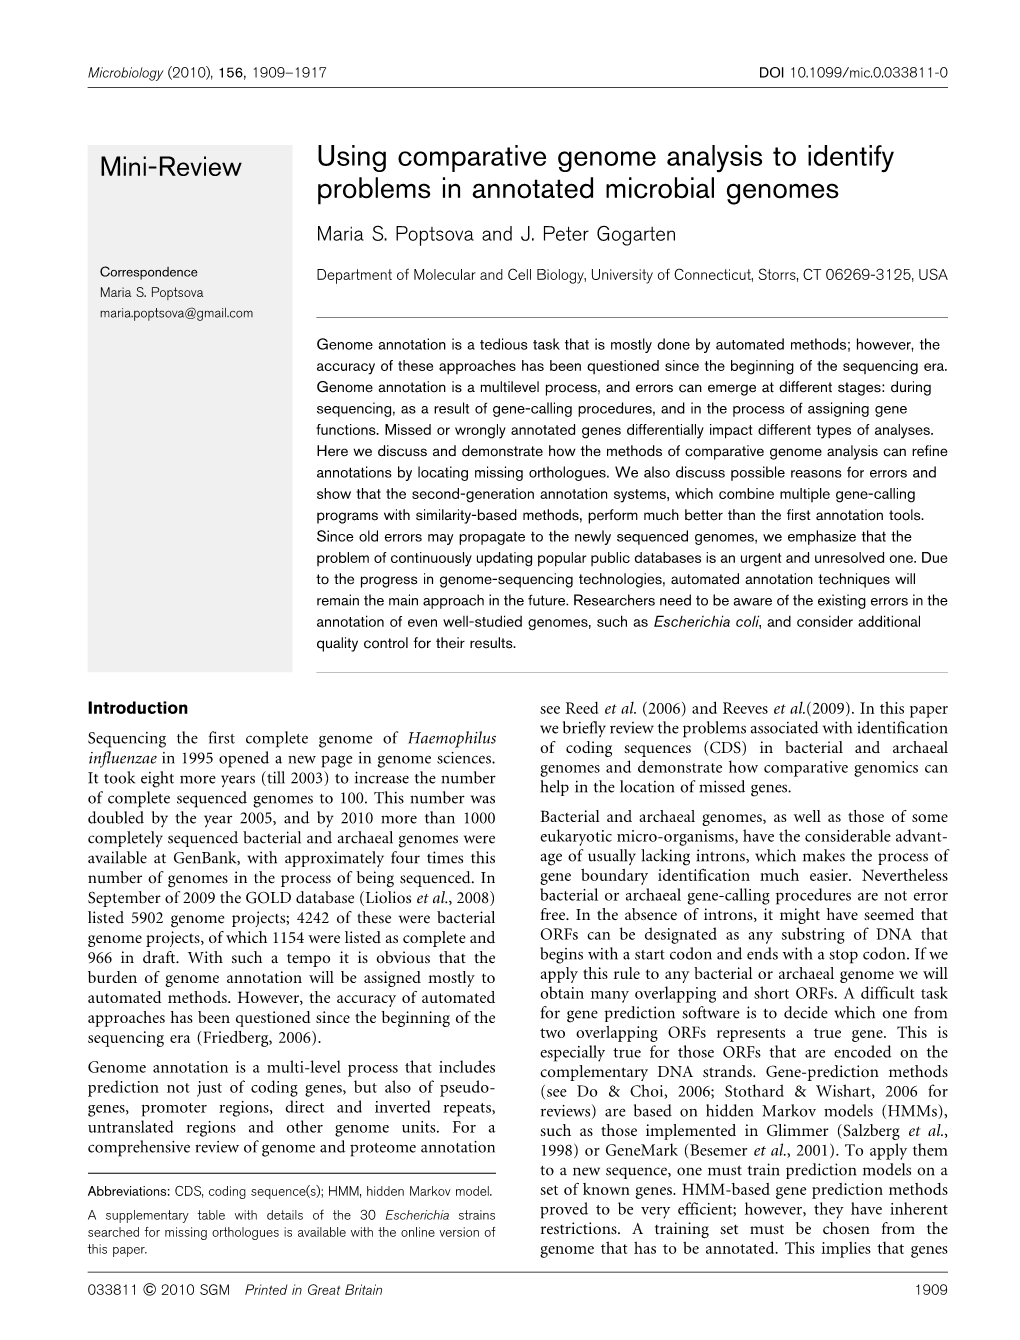 Using Comparative Genome Analysis to Identify Problems in Annotated Microbial Genomes